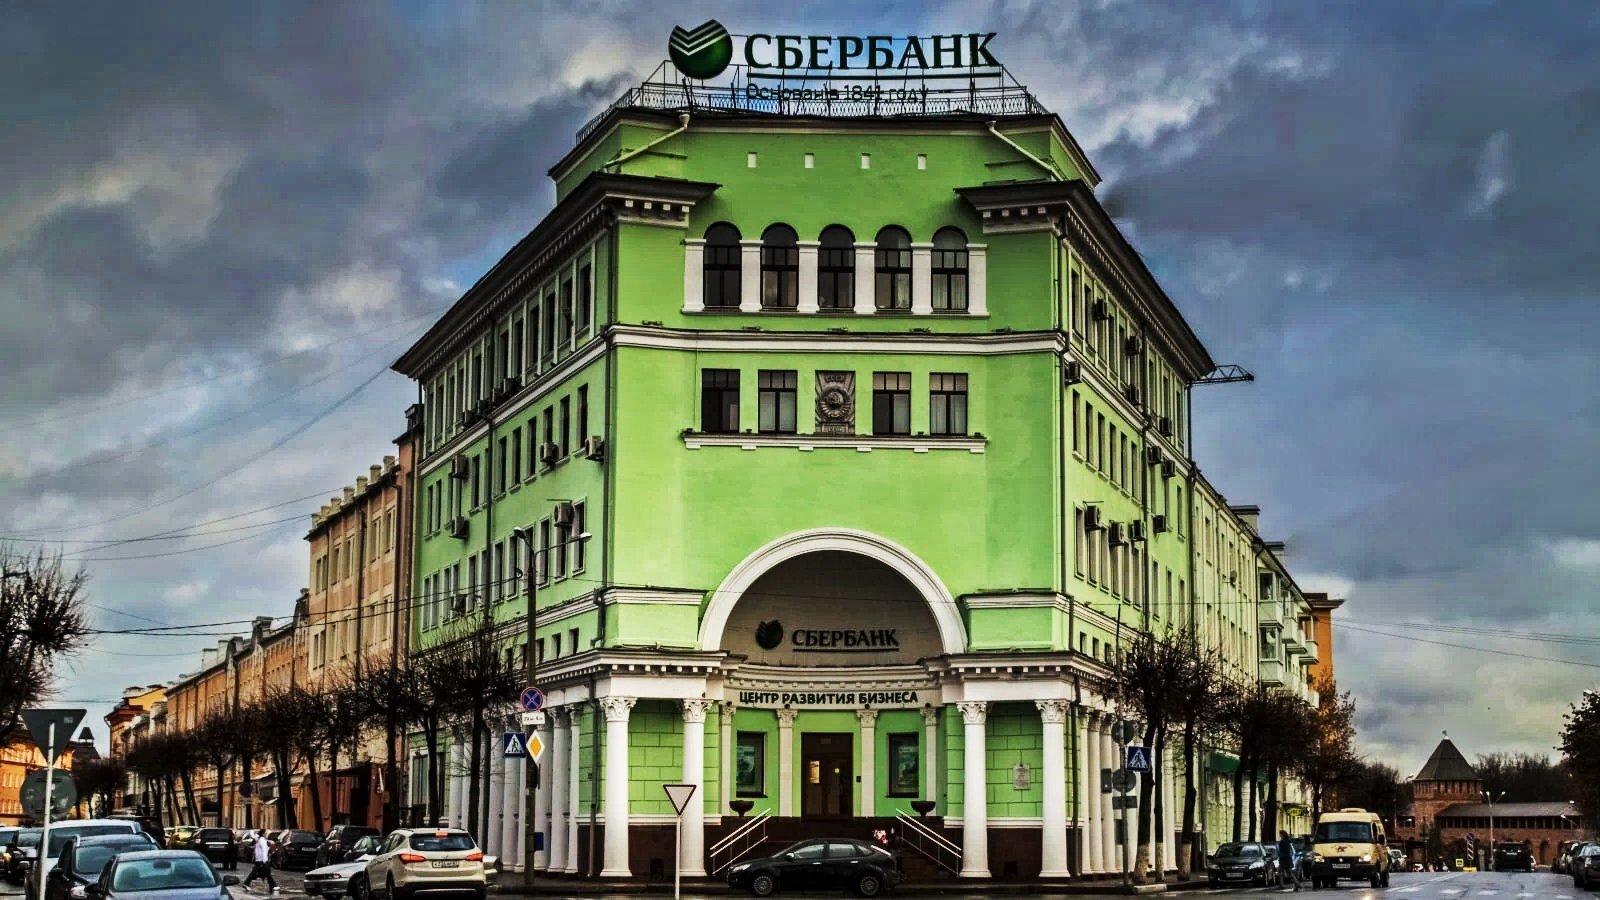 Russian state-owned Sberbank hit by 1 million RPS DDoS attack